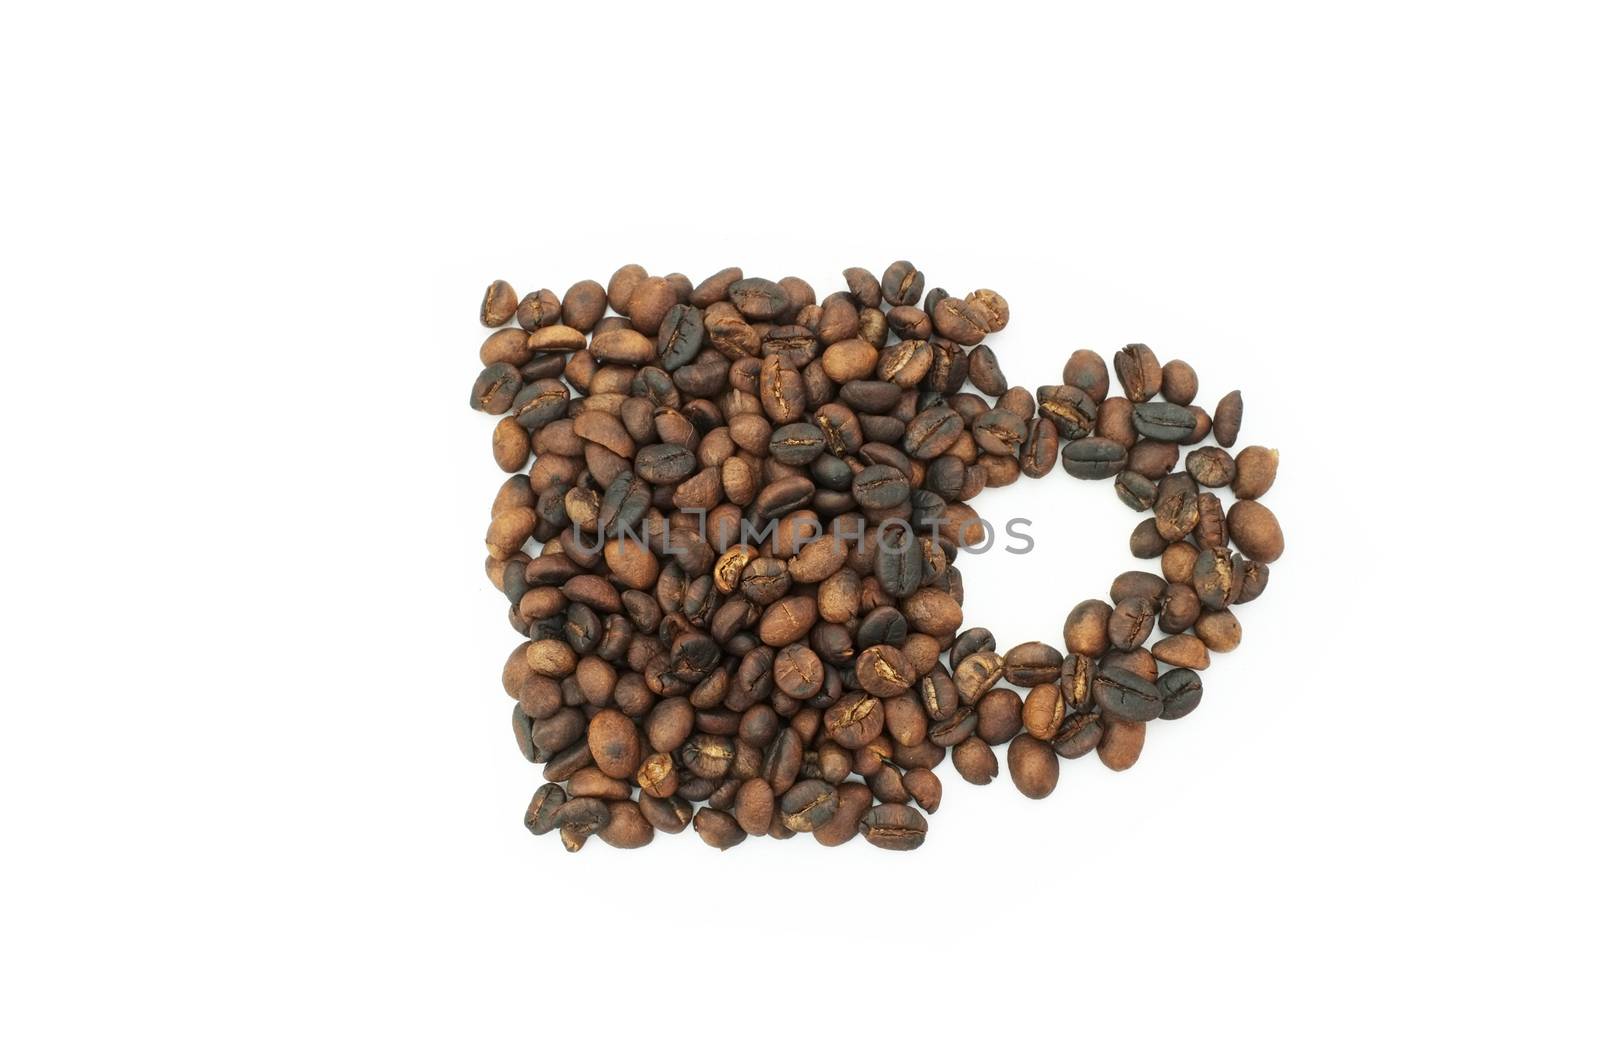 Roasted coffee beans in shape of cup